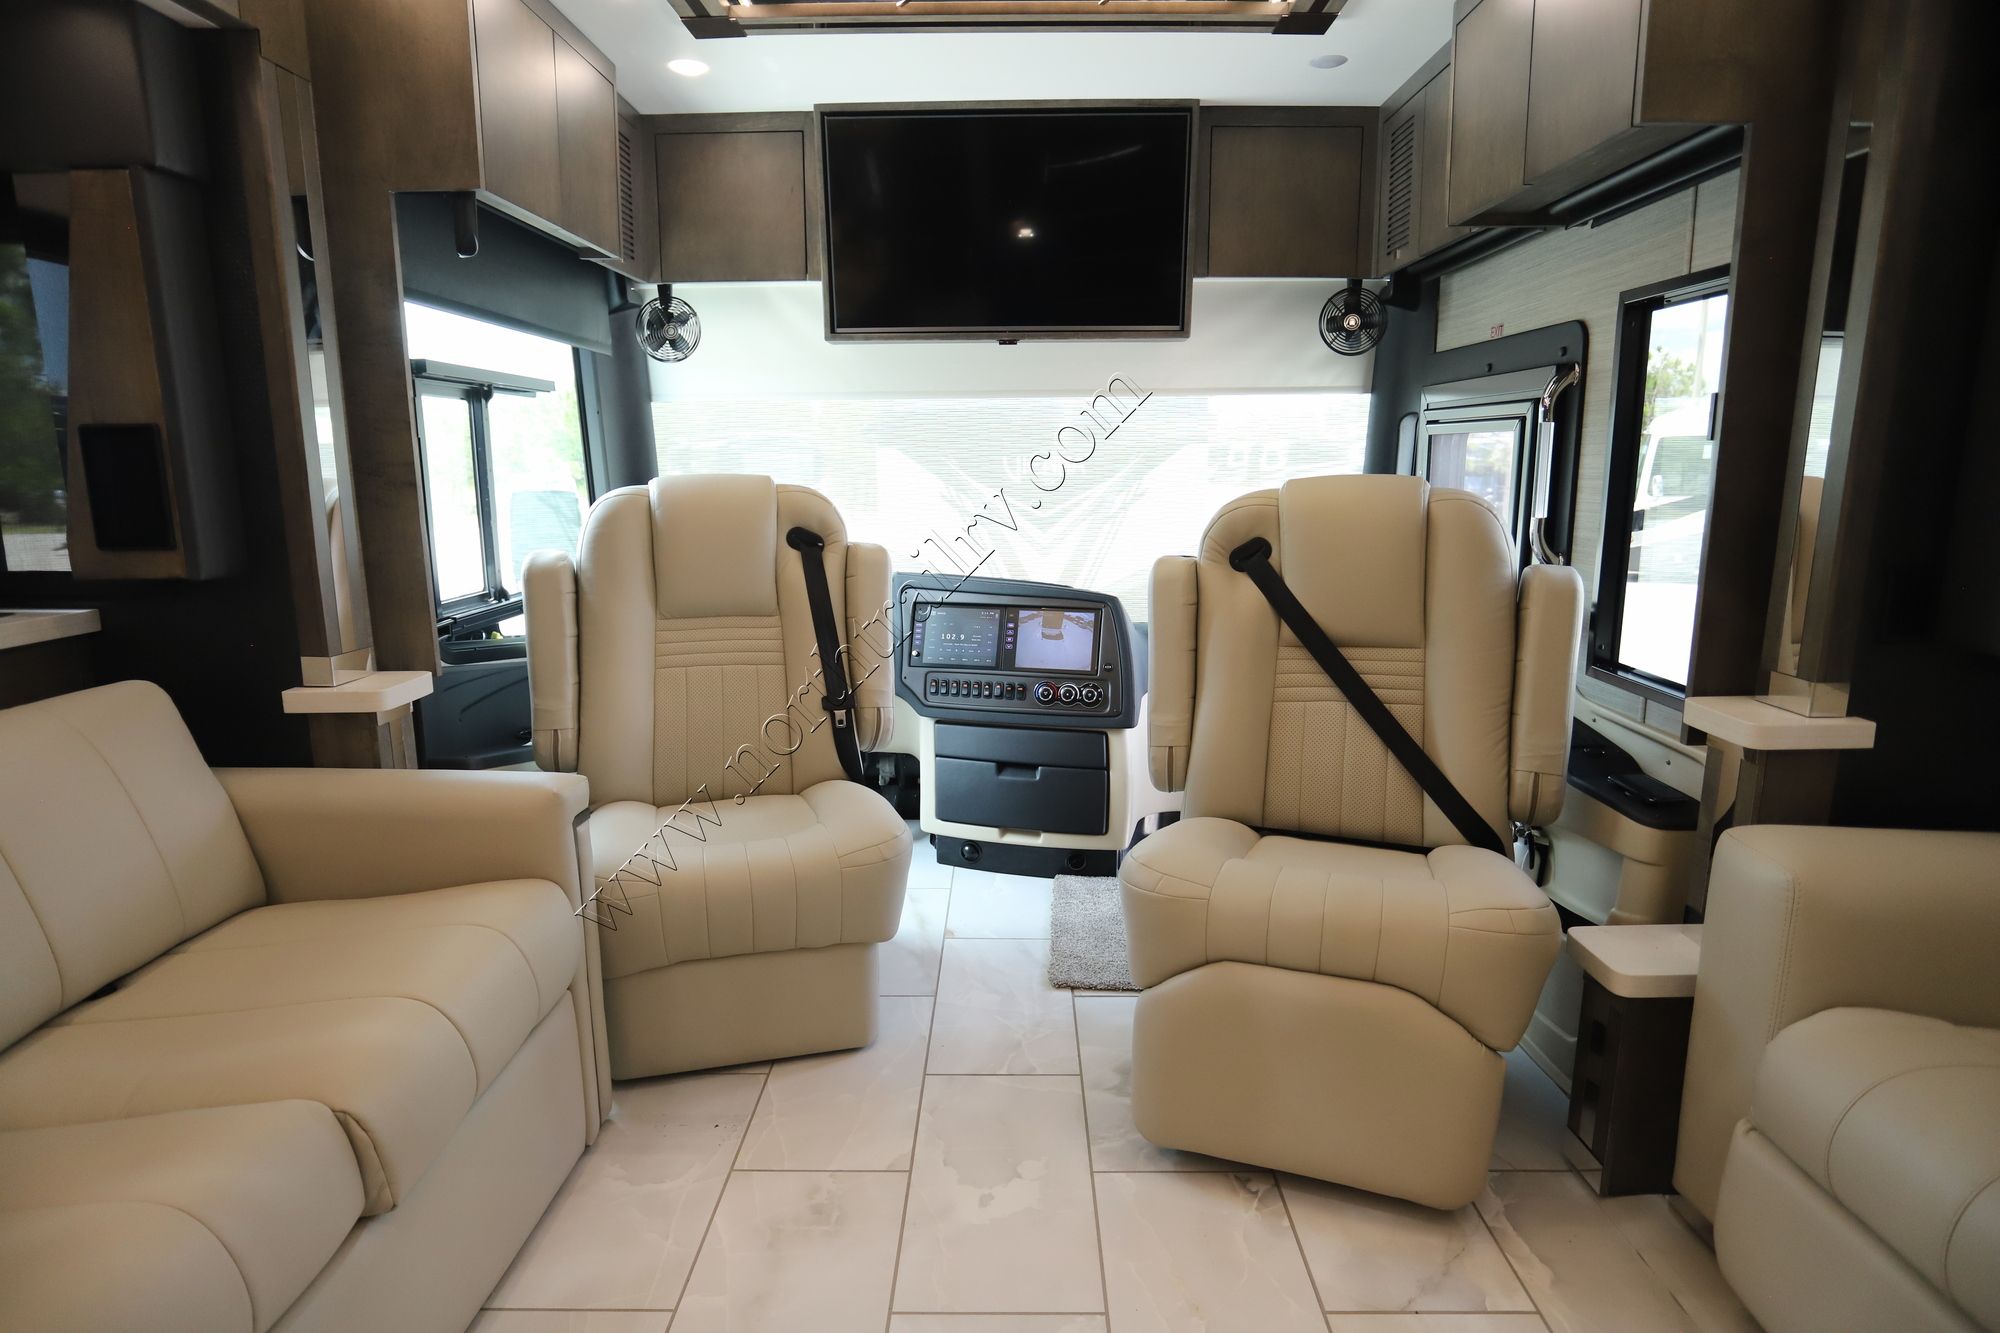 New 2023 Tiffin Motor Homes Zephyr 45 FZ Class A  For Sale